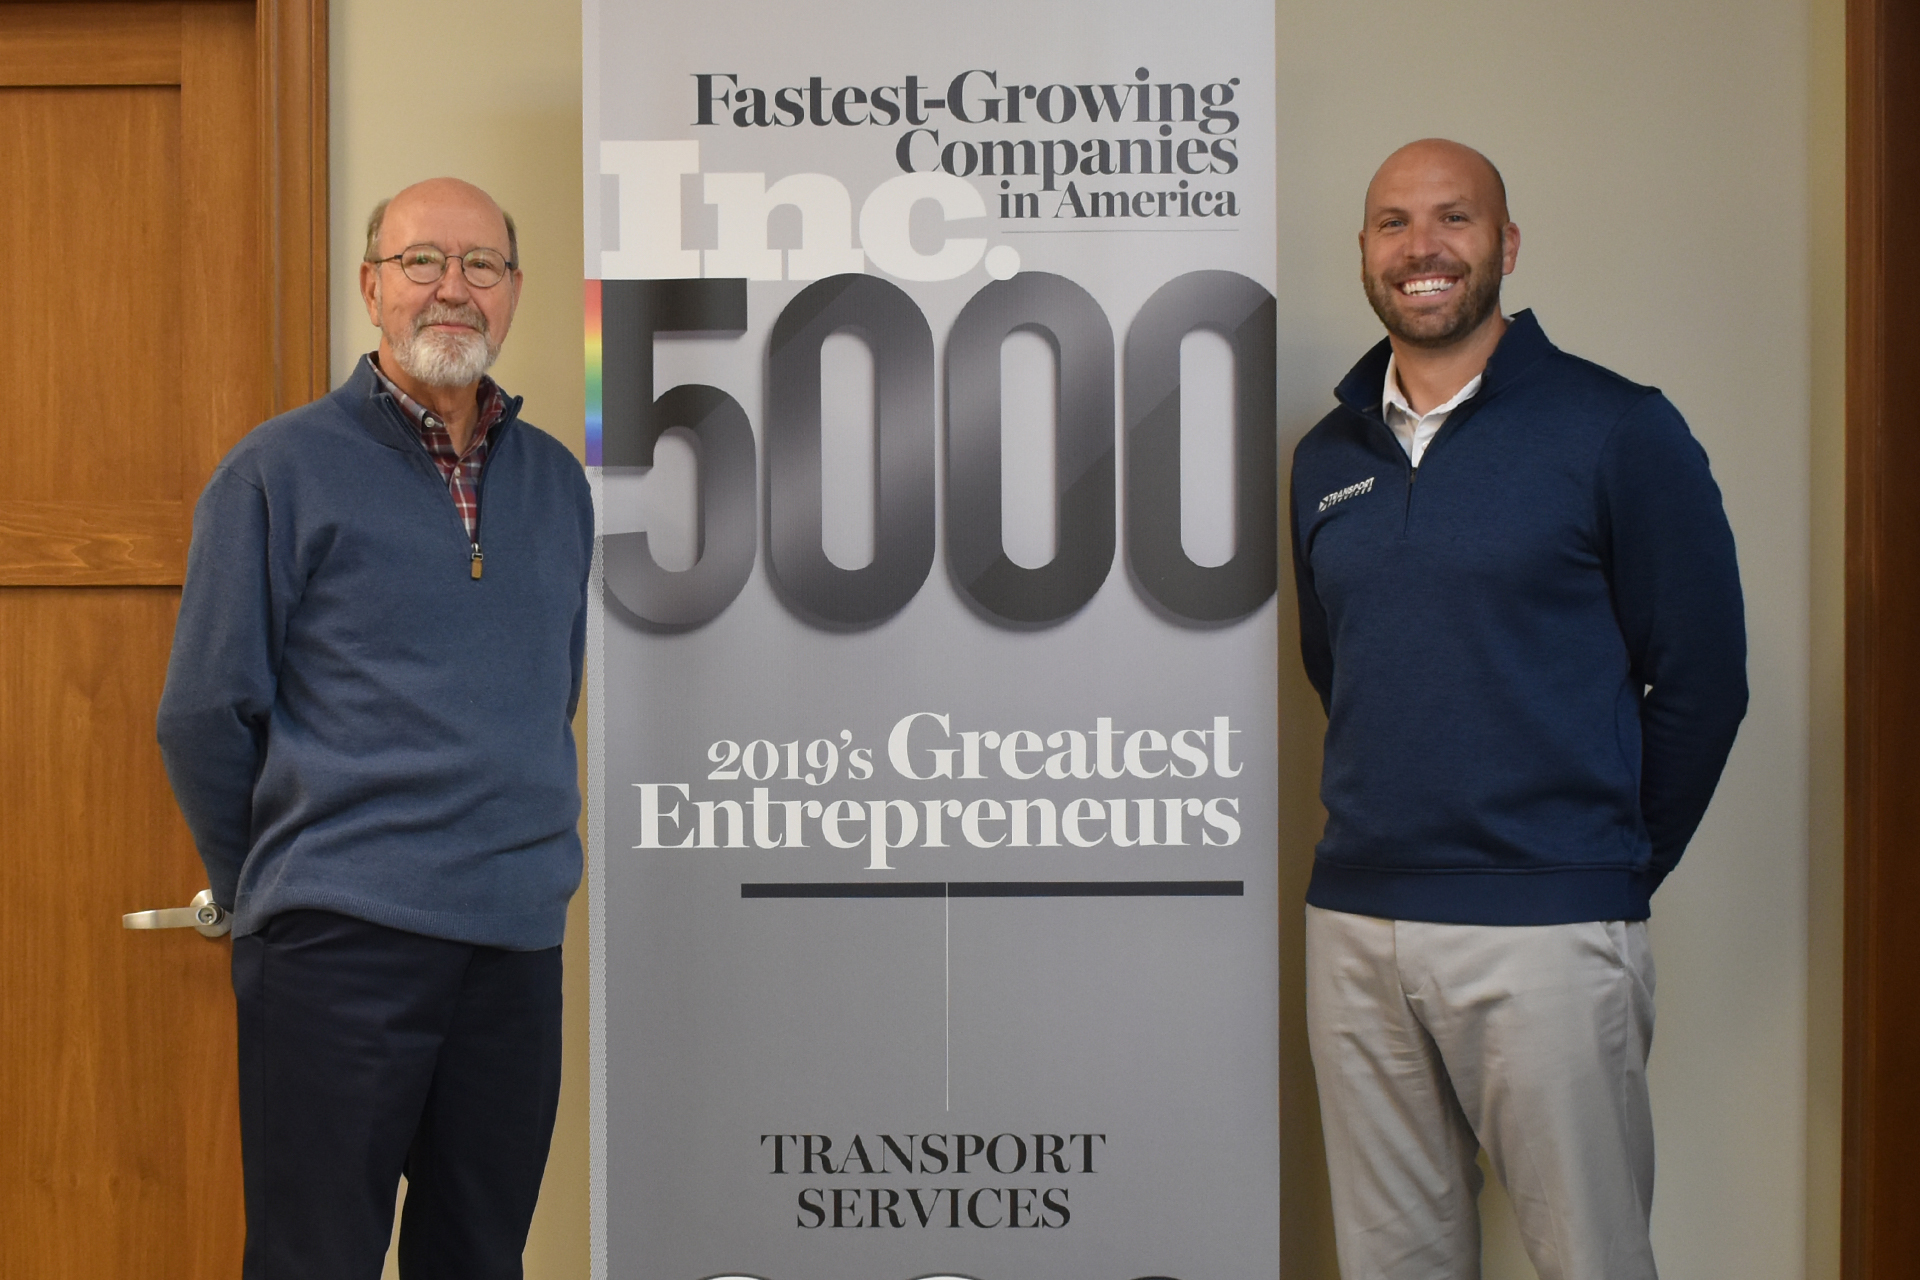 Transport Services is Named to the Inc. 5000 List of America’s Fastest-Growing Private Companies